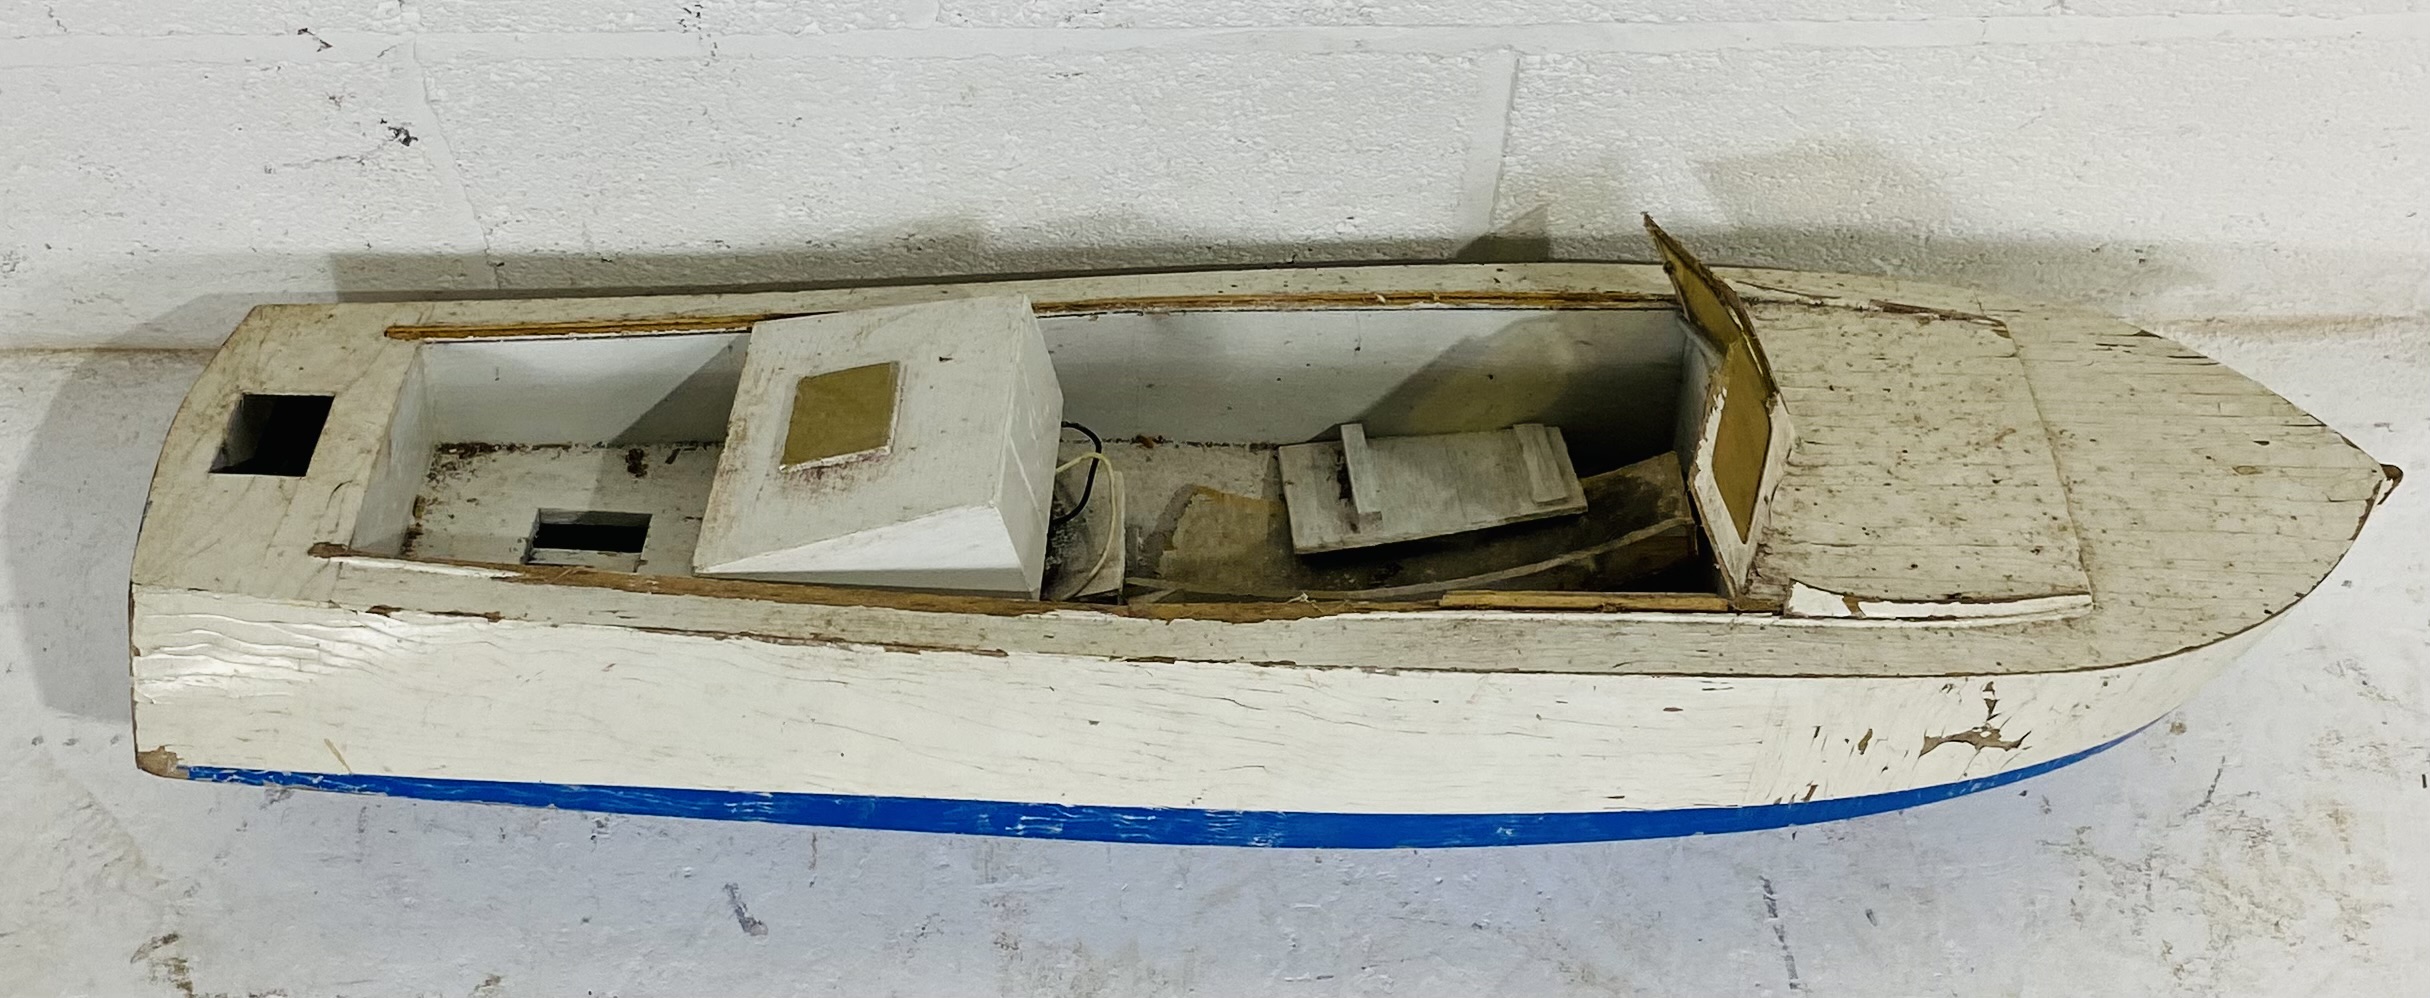 A motorised model of a speed boat - A/F - overall length 93cm - Image 2 of 6